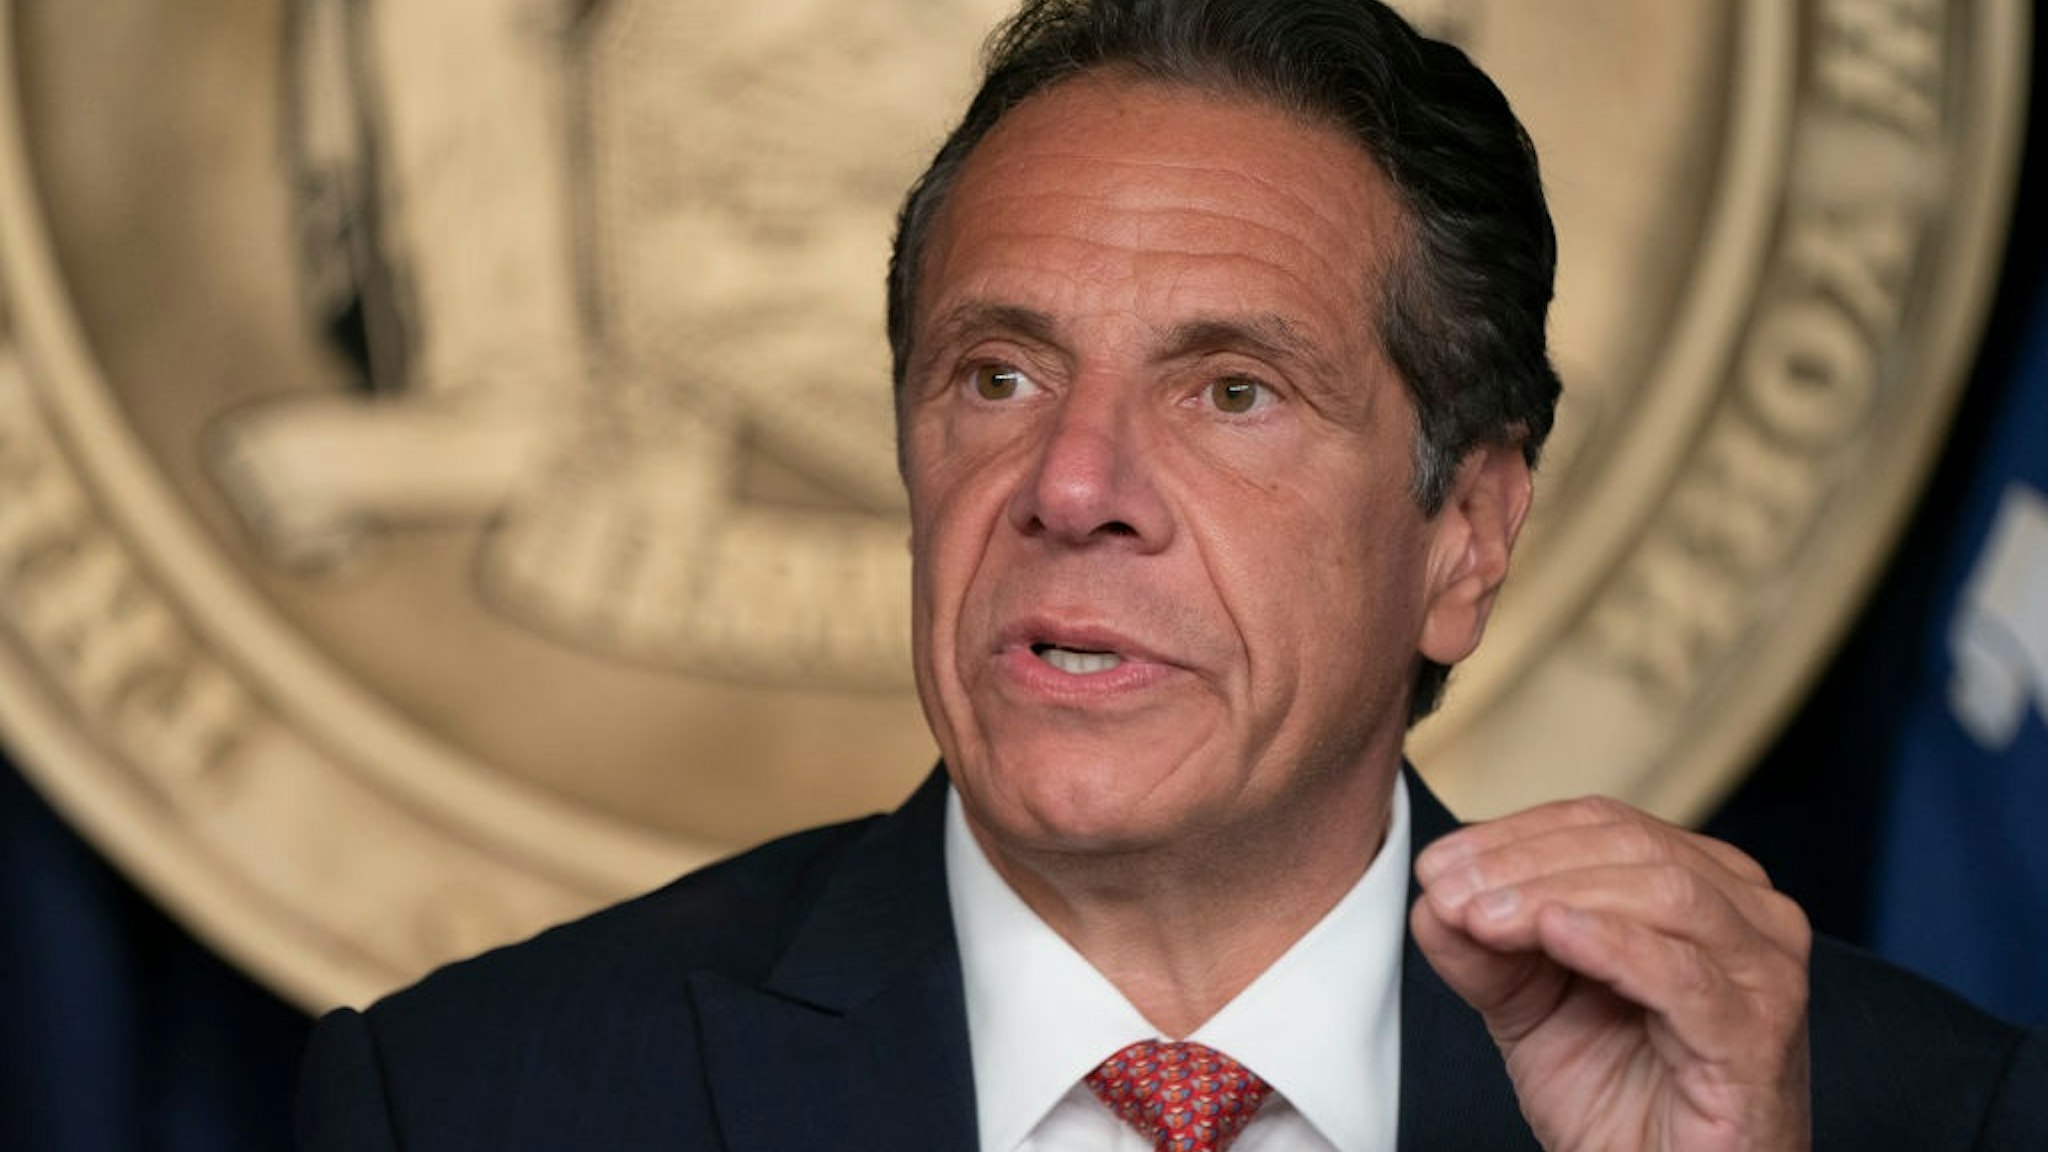 NEW YORK, UNITED STATES - 2021/08/02: Governor Andrew Cuomo holds press briefing and makes announcement to combat COVID-19 Delta variant at 633 3rd Avenue.